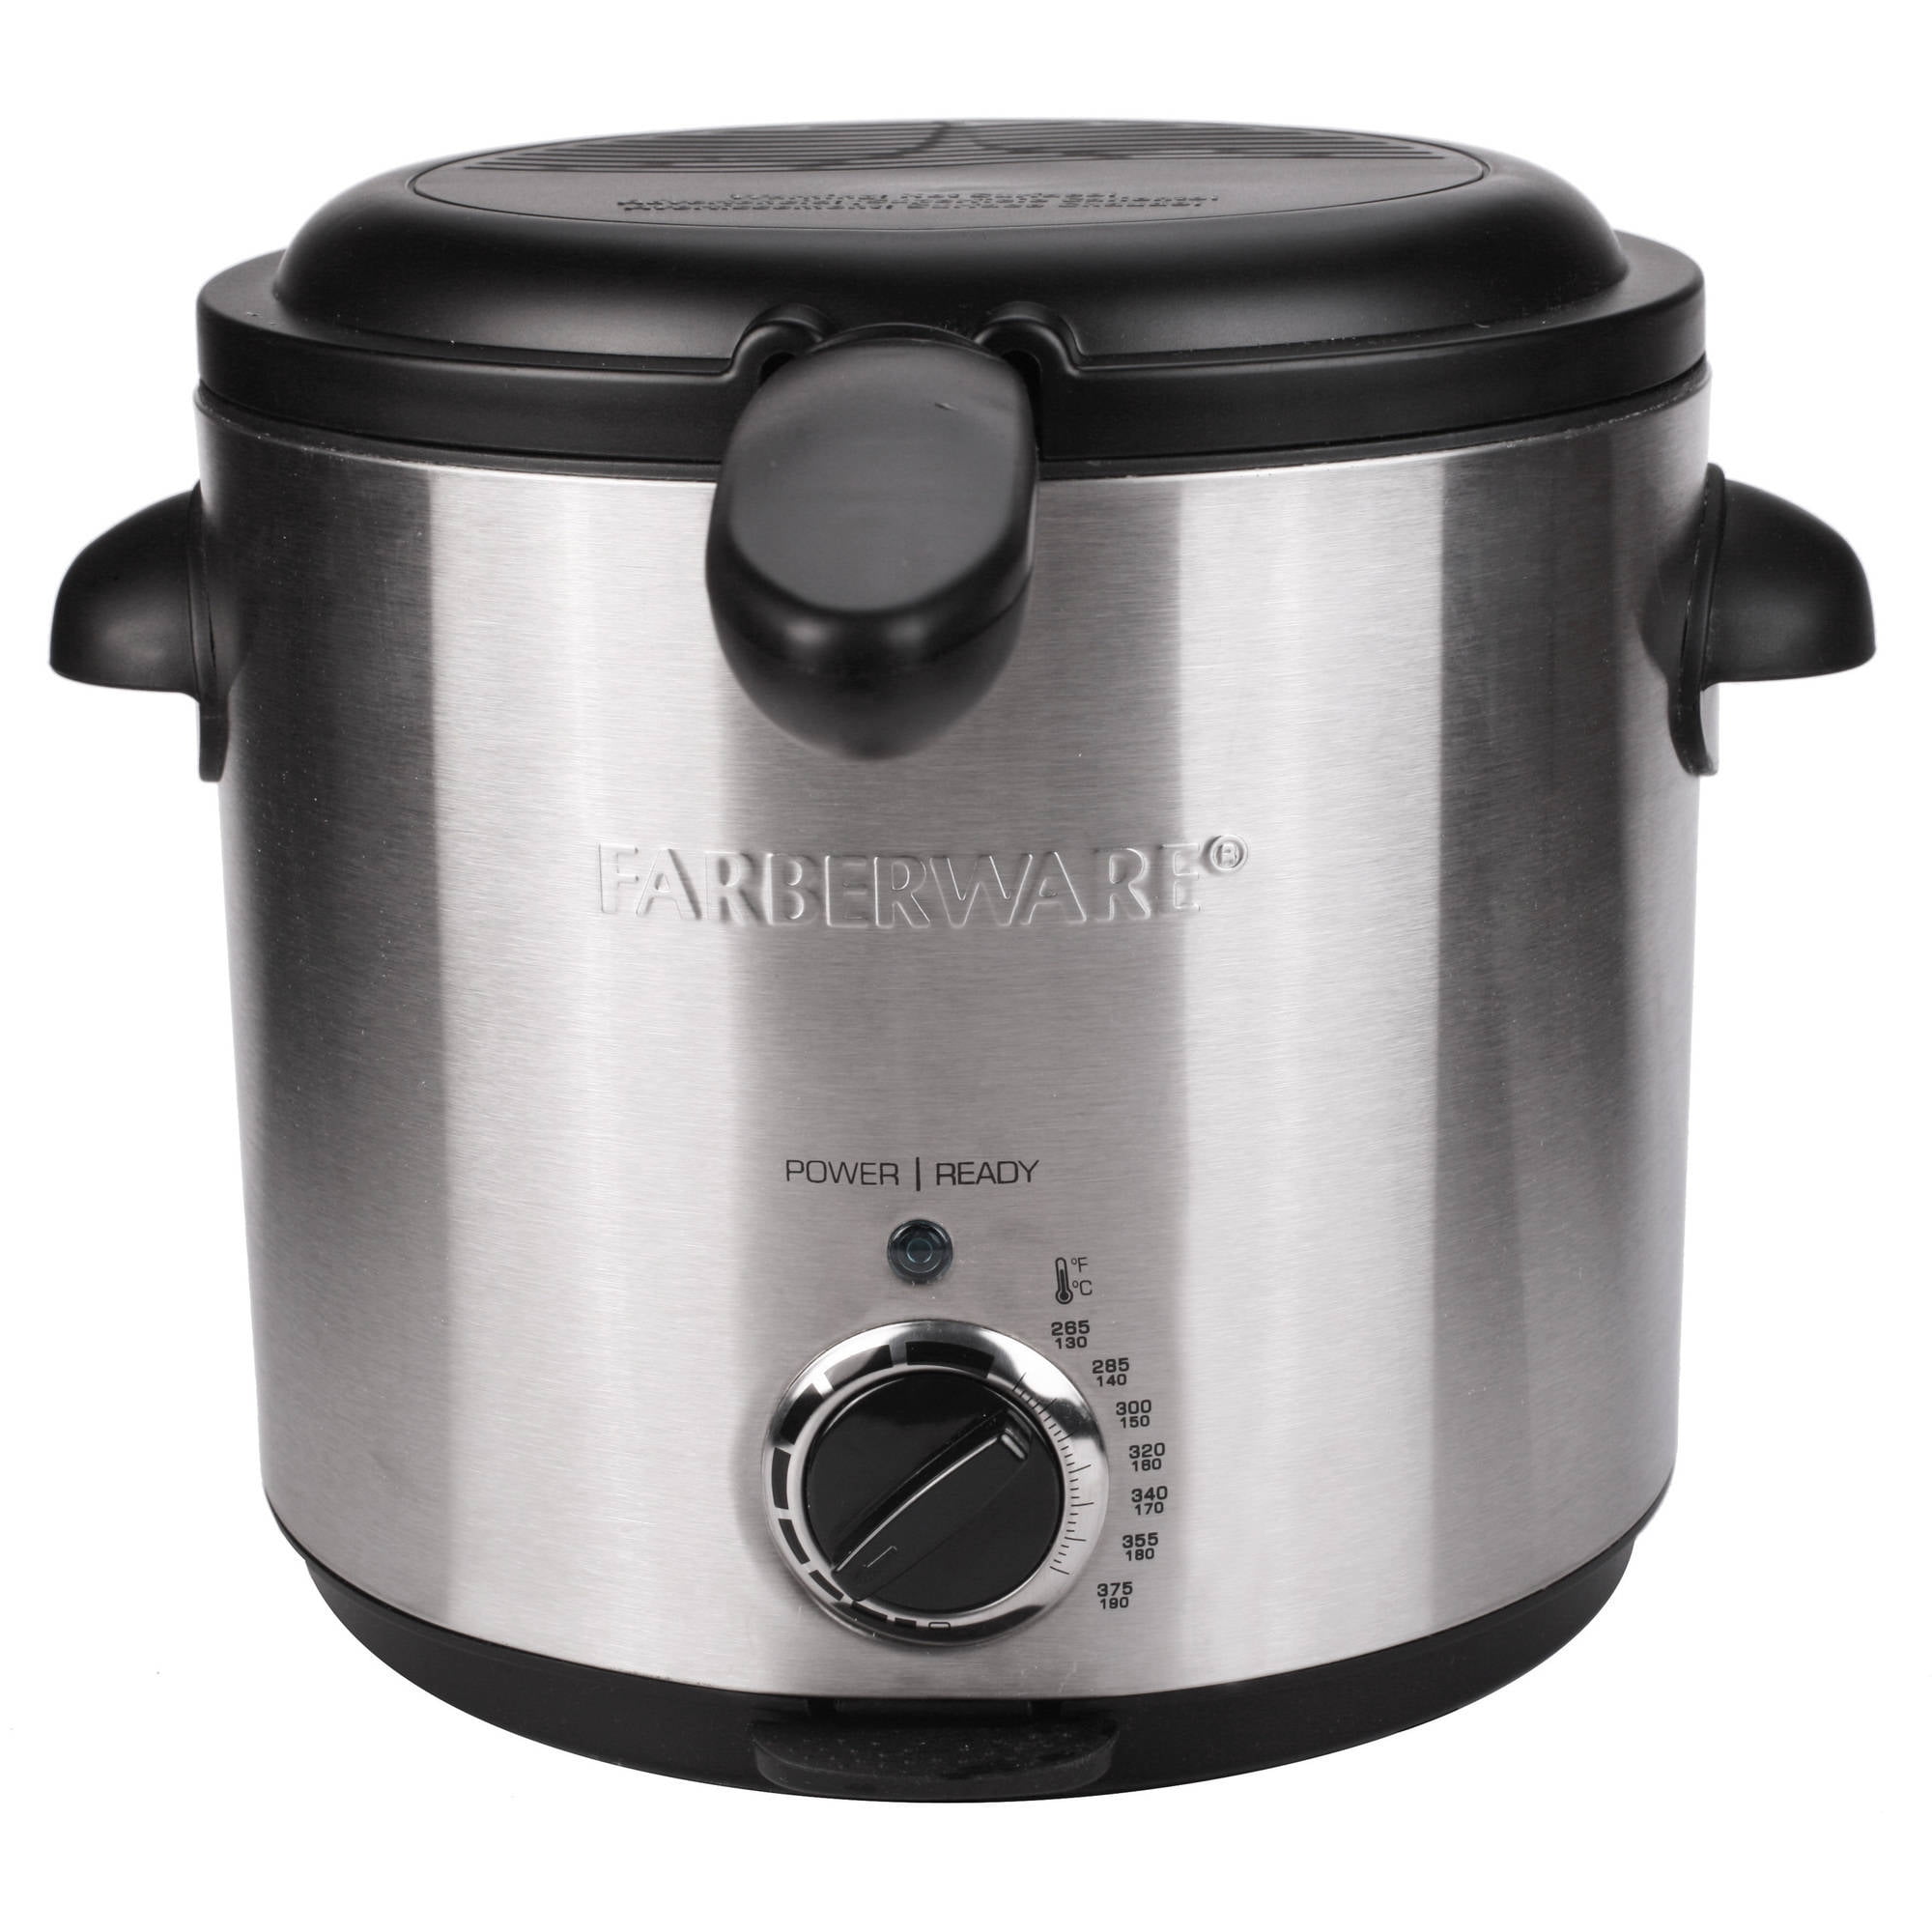 Farberware 4L Deep Fryer, Stainless Steel, Electric,Includes 2